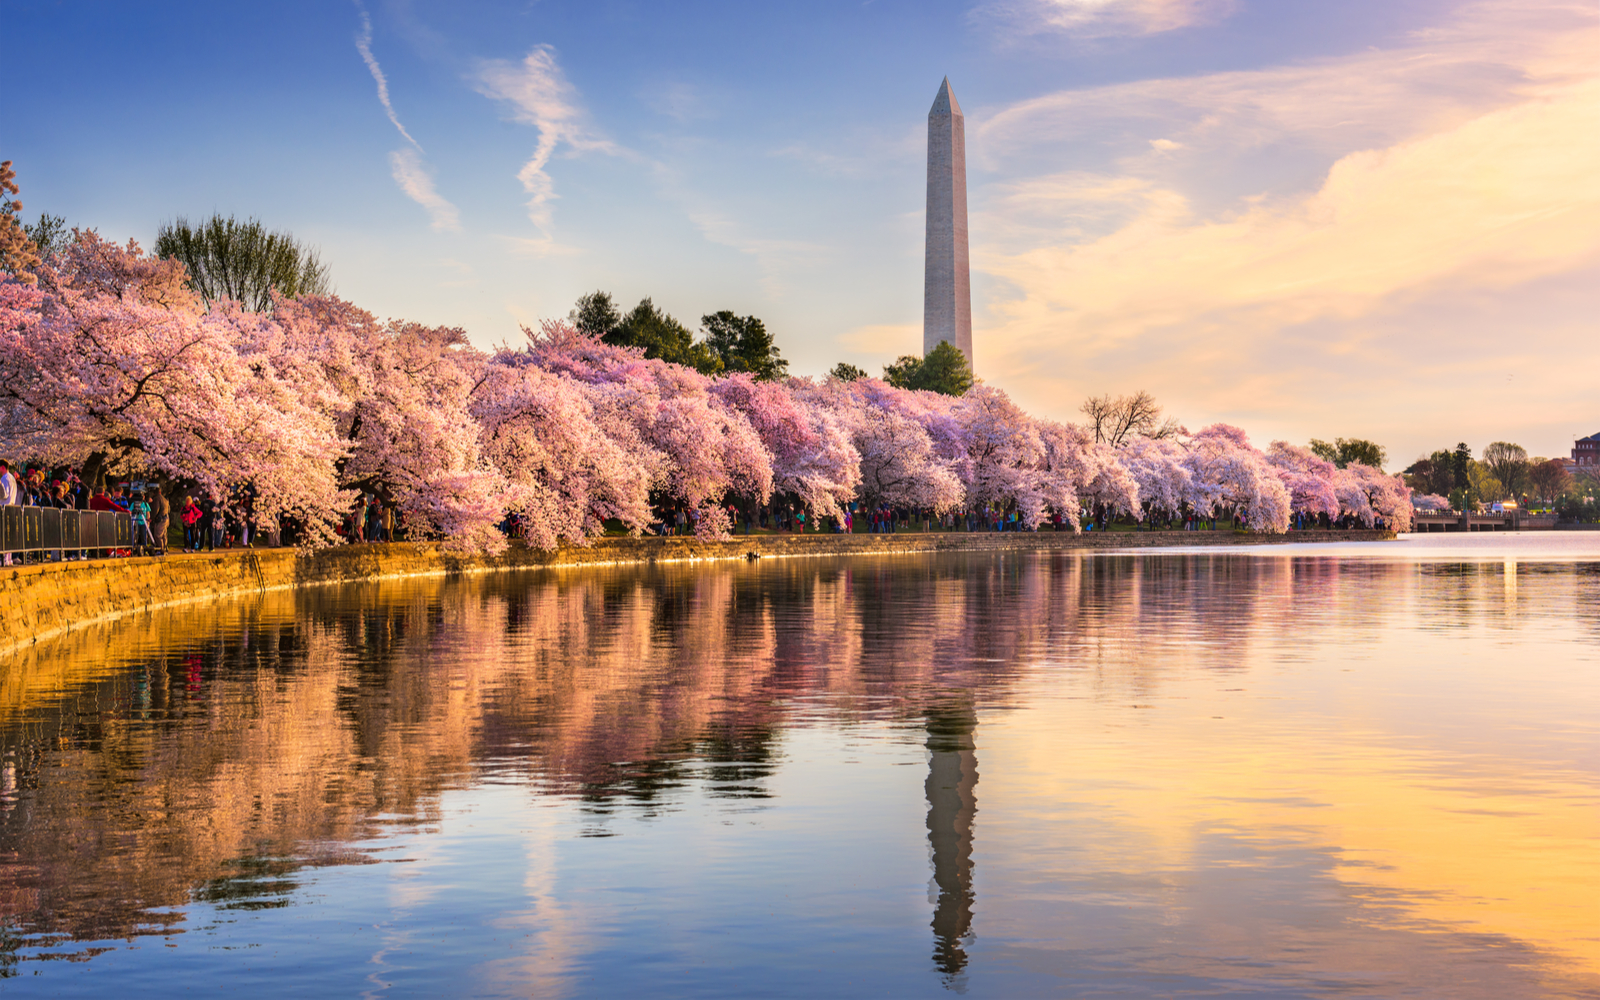 Best Time to Visit Washington, D.C. in 2022